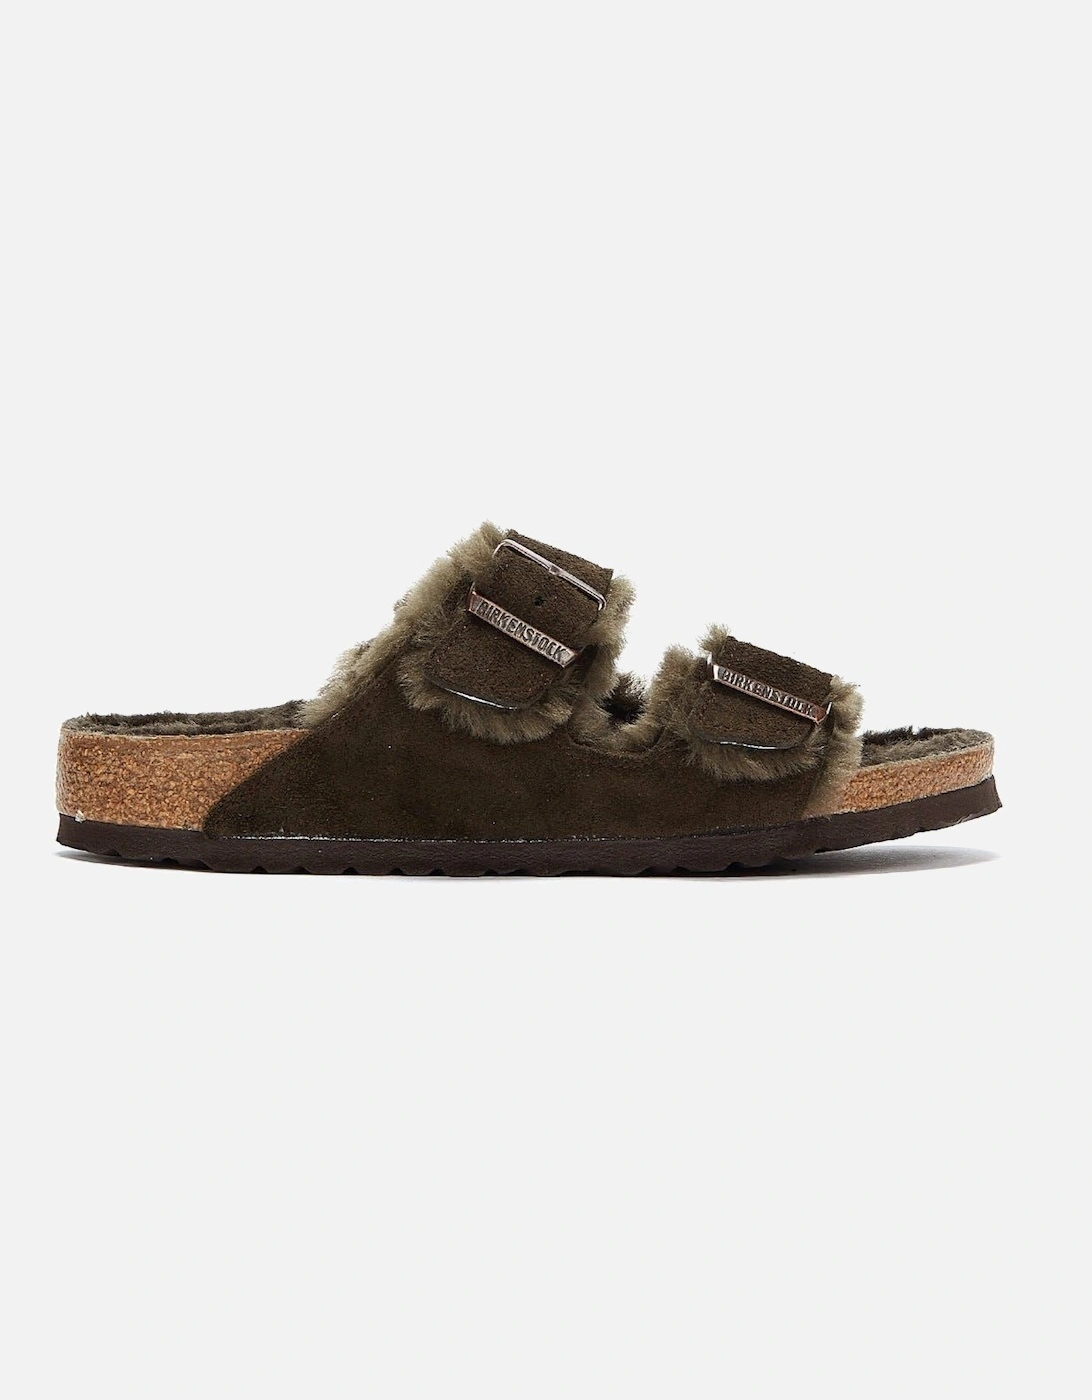 Brown Mocca Shearling Sandals